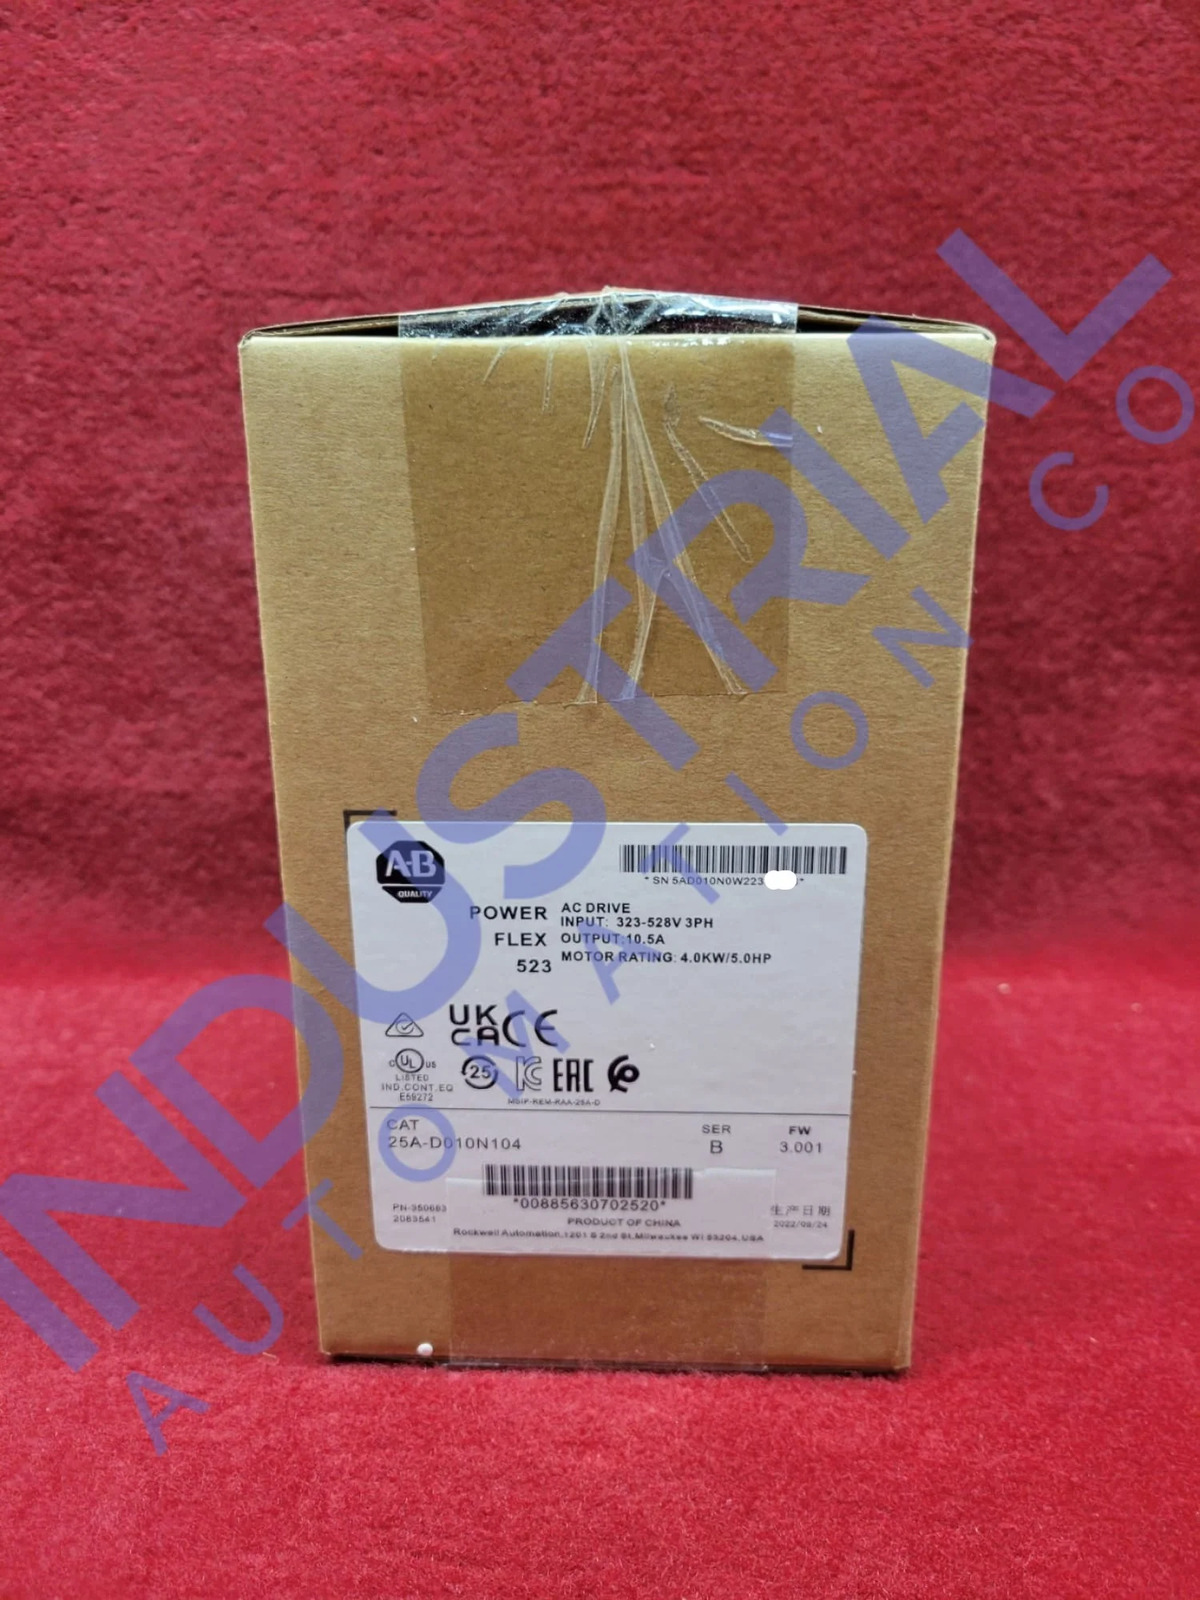 **SURPLUS SEALED** Allen-Bradley 25A-D010N104 ***Next Day Air Available***